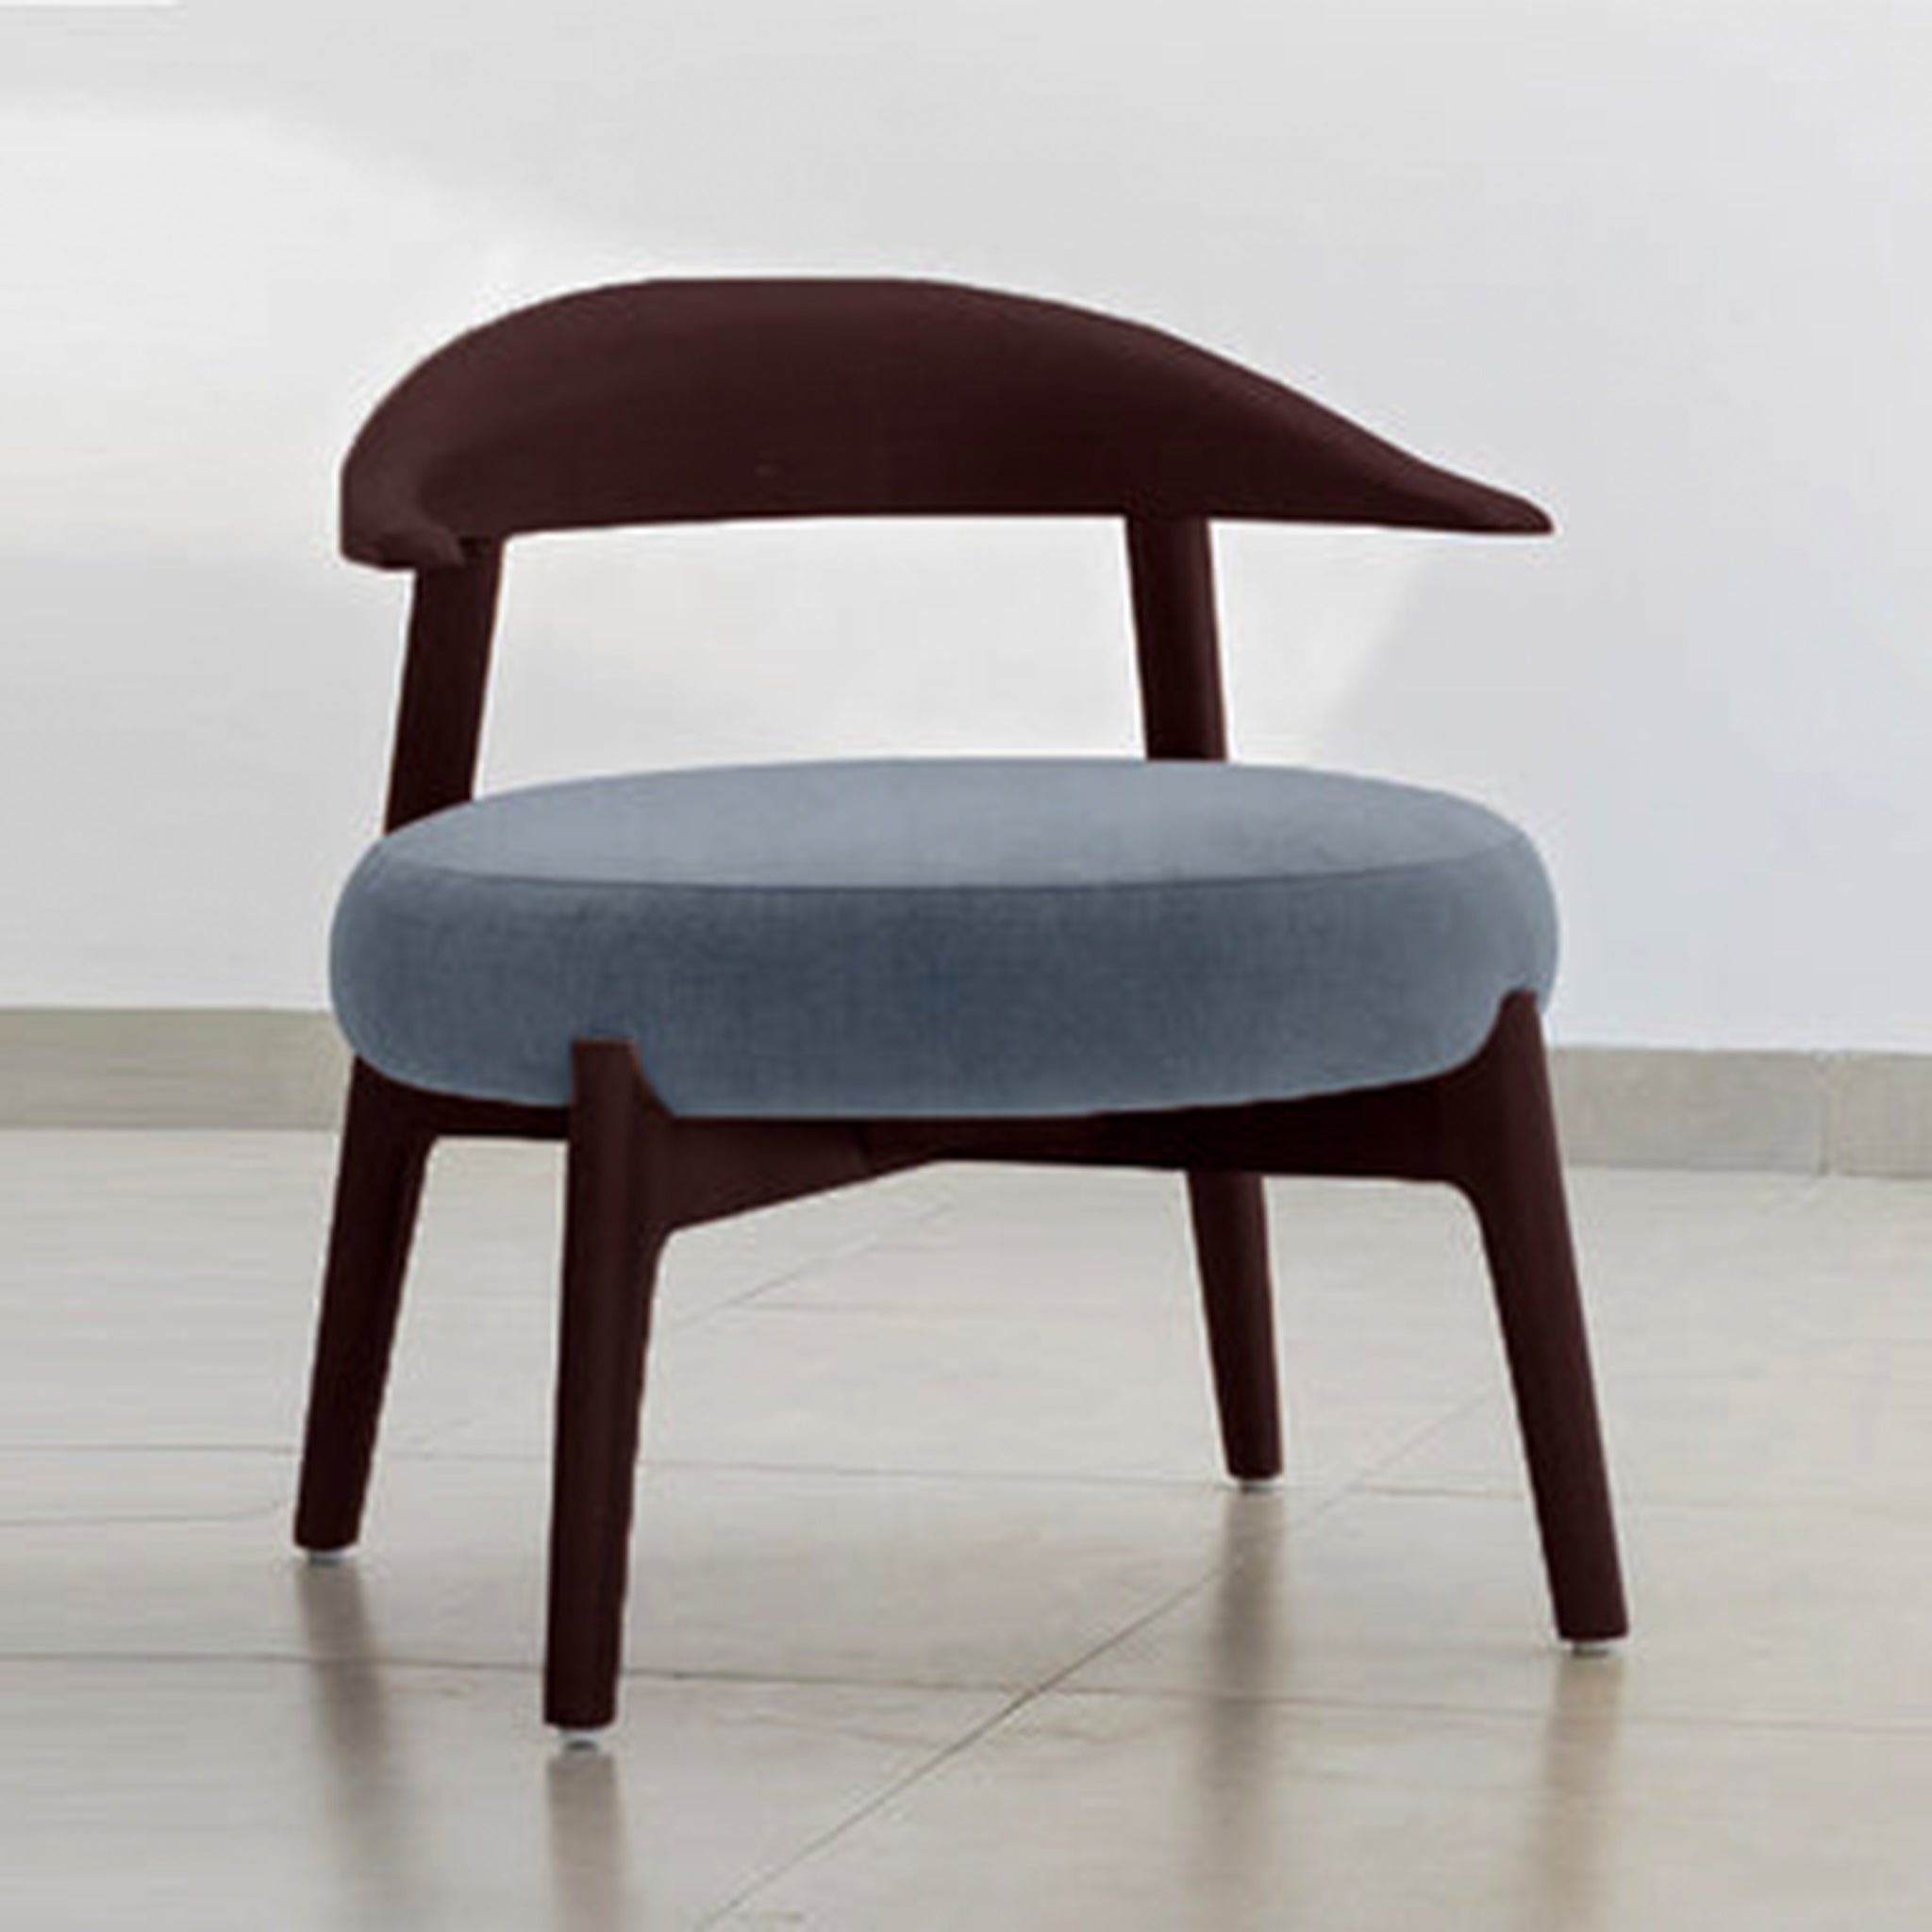 "The Hyde Accent Chair with a sleek design and comfortable upholstery"